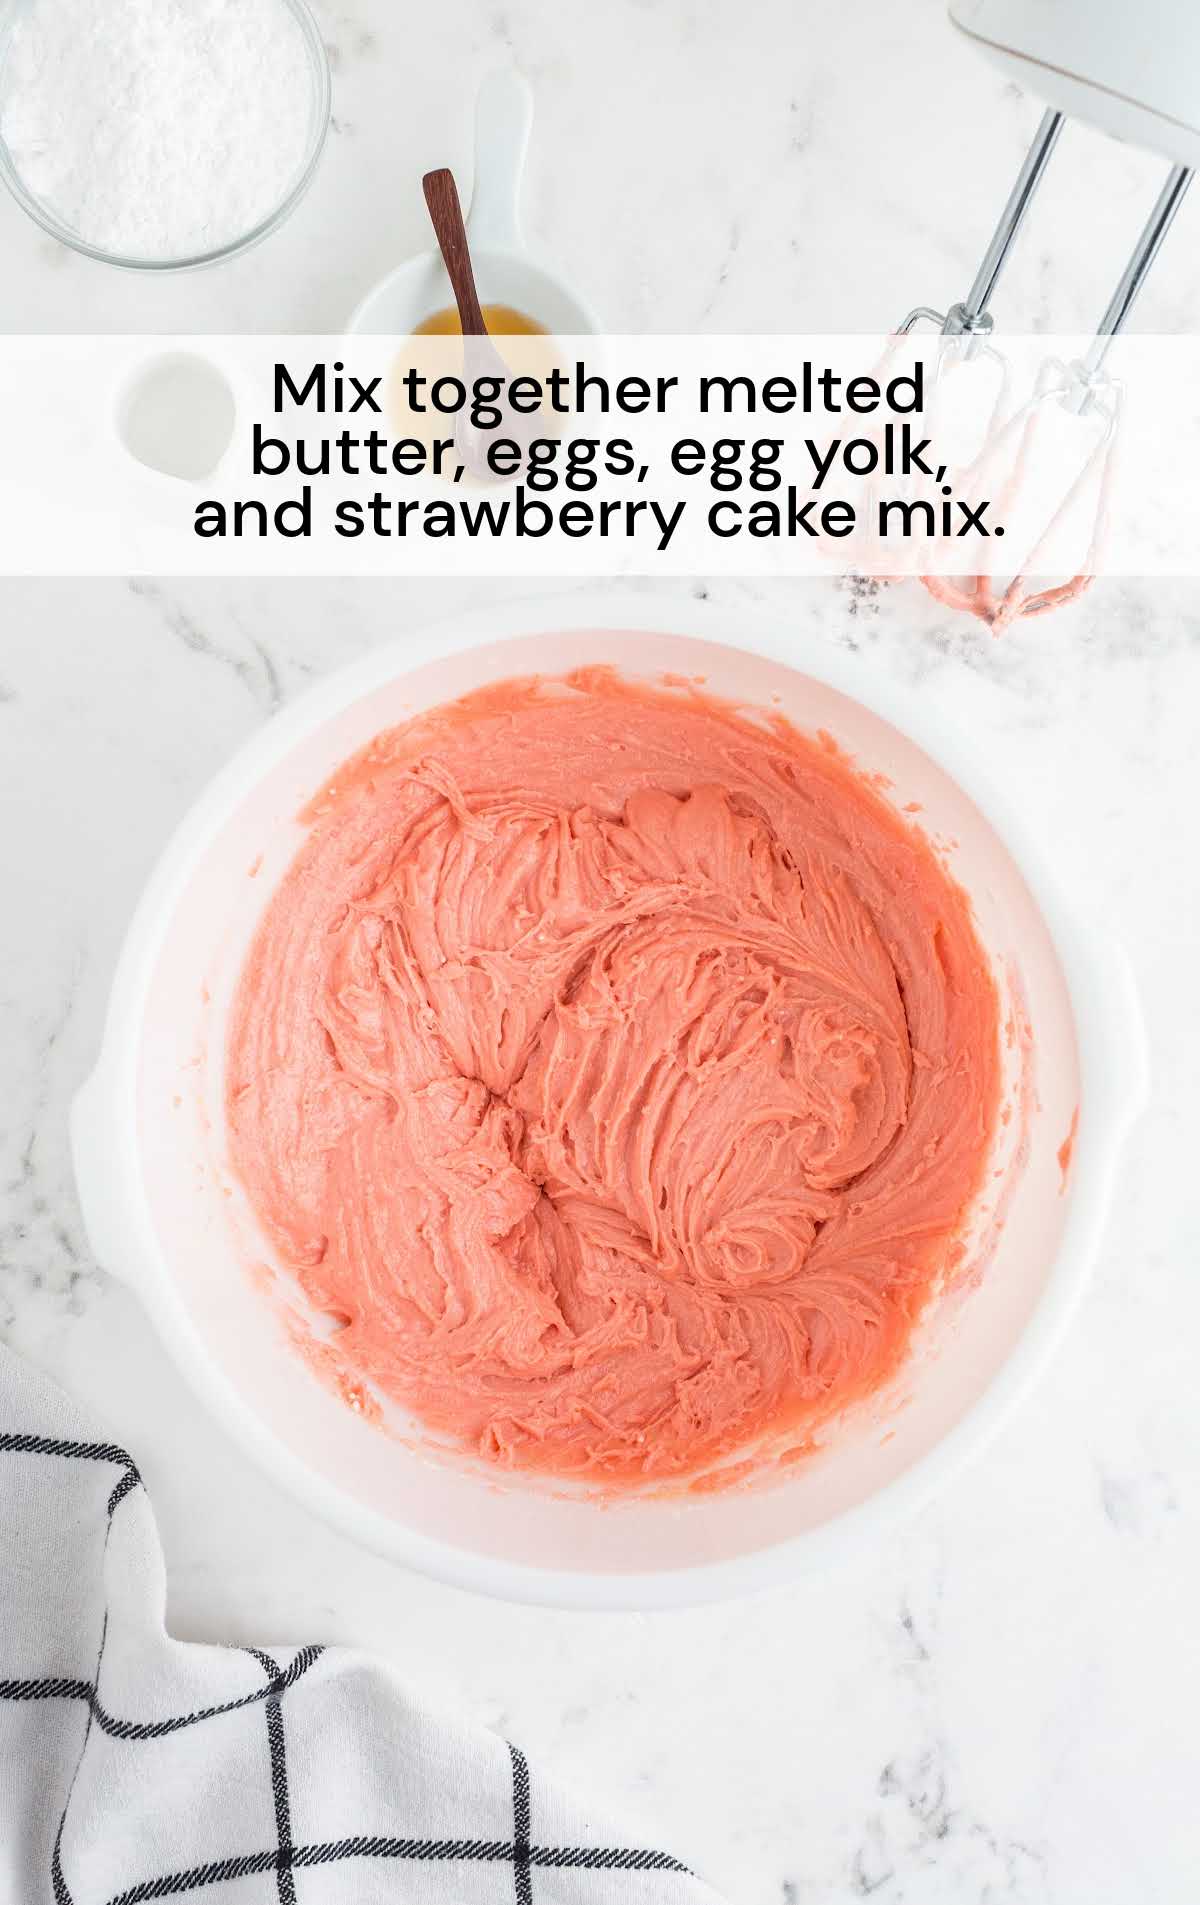 butter, eggs, egg yolk, and strawberry cake mix mixed together in a bowl